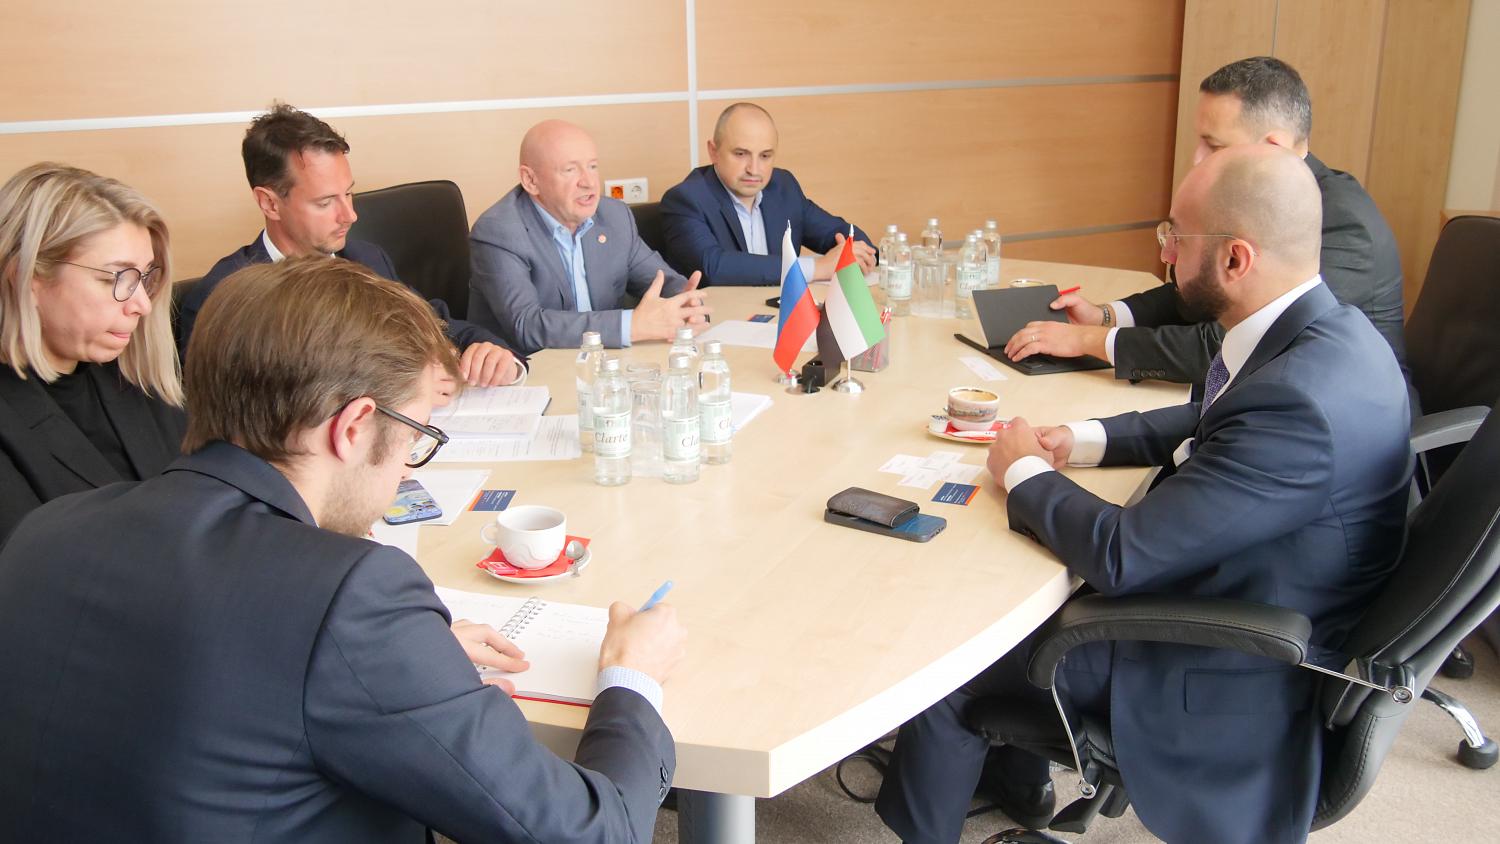 During the visit of the Dubais Chamber of Commerce delegation, the prospects for cooperation were outlined